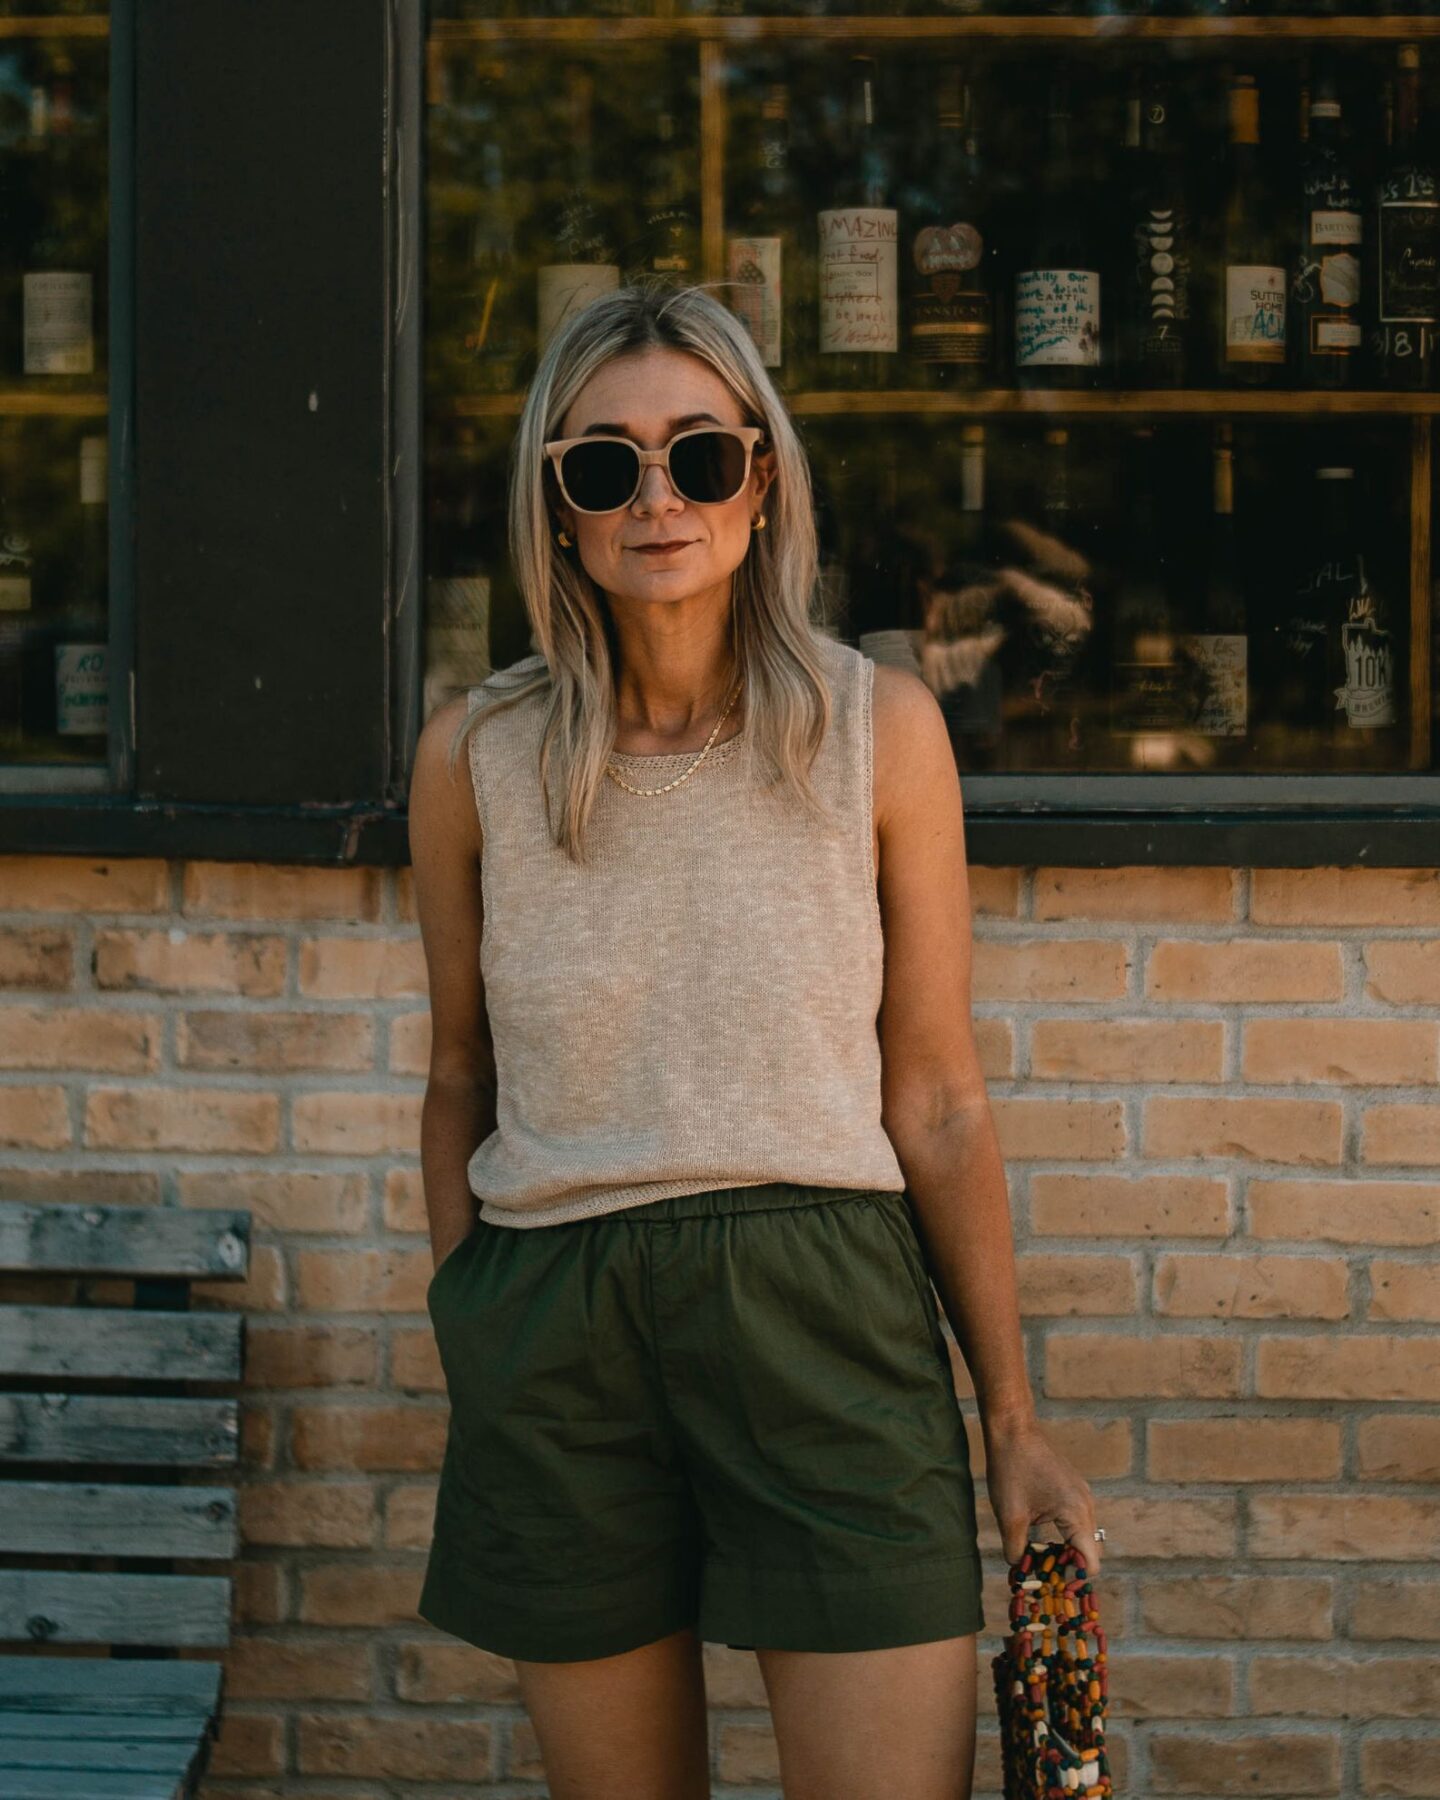 Karin Emily wears her Everlane favorites: a pair of olive green easy shorts